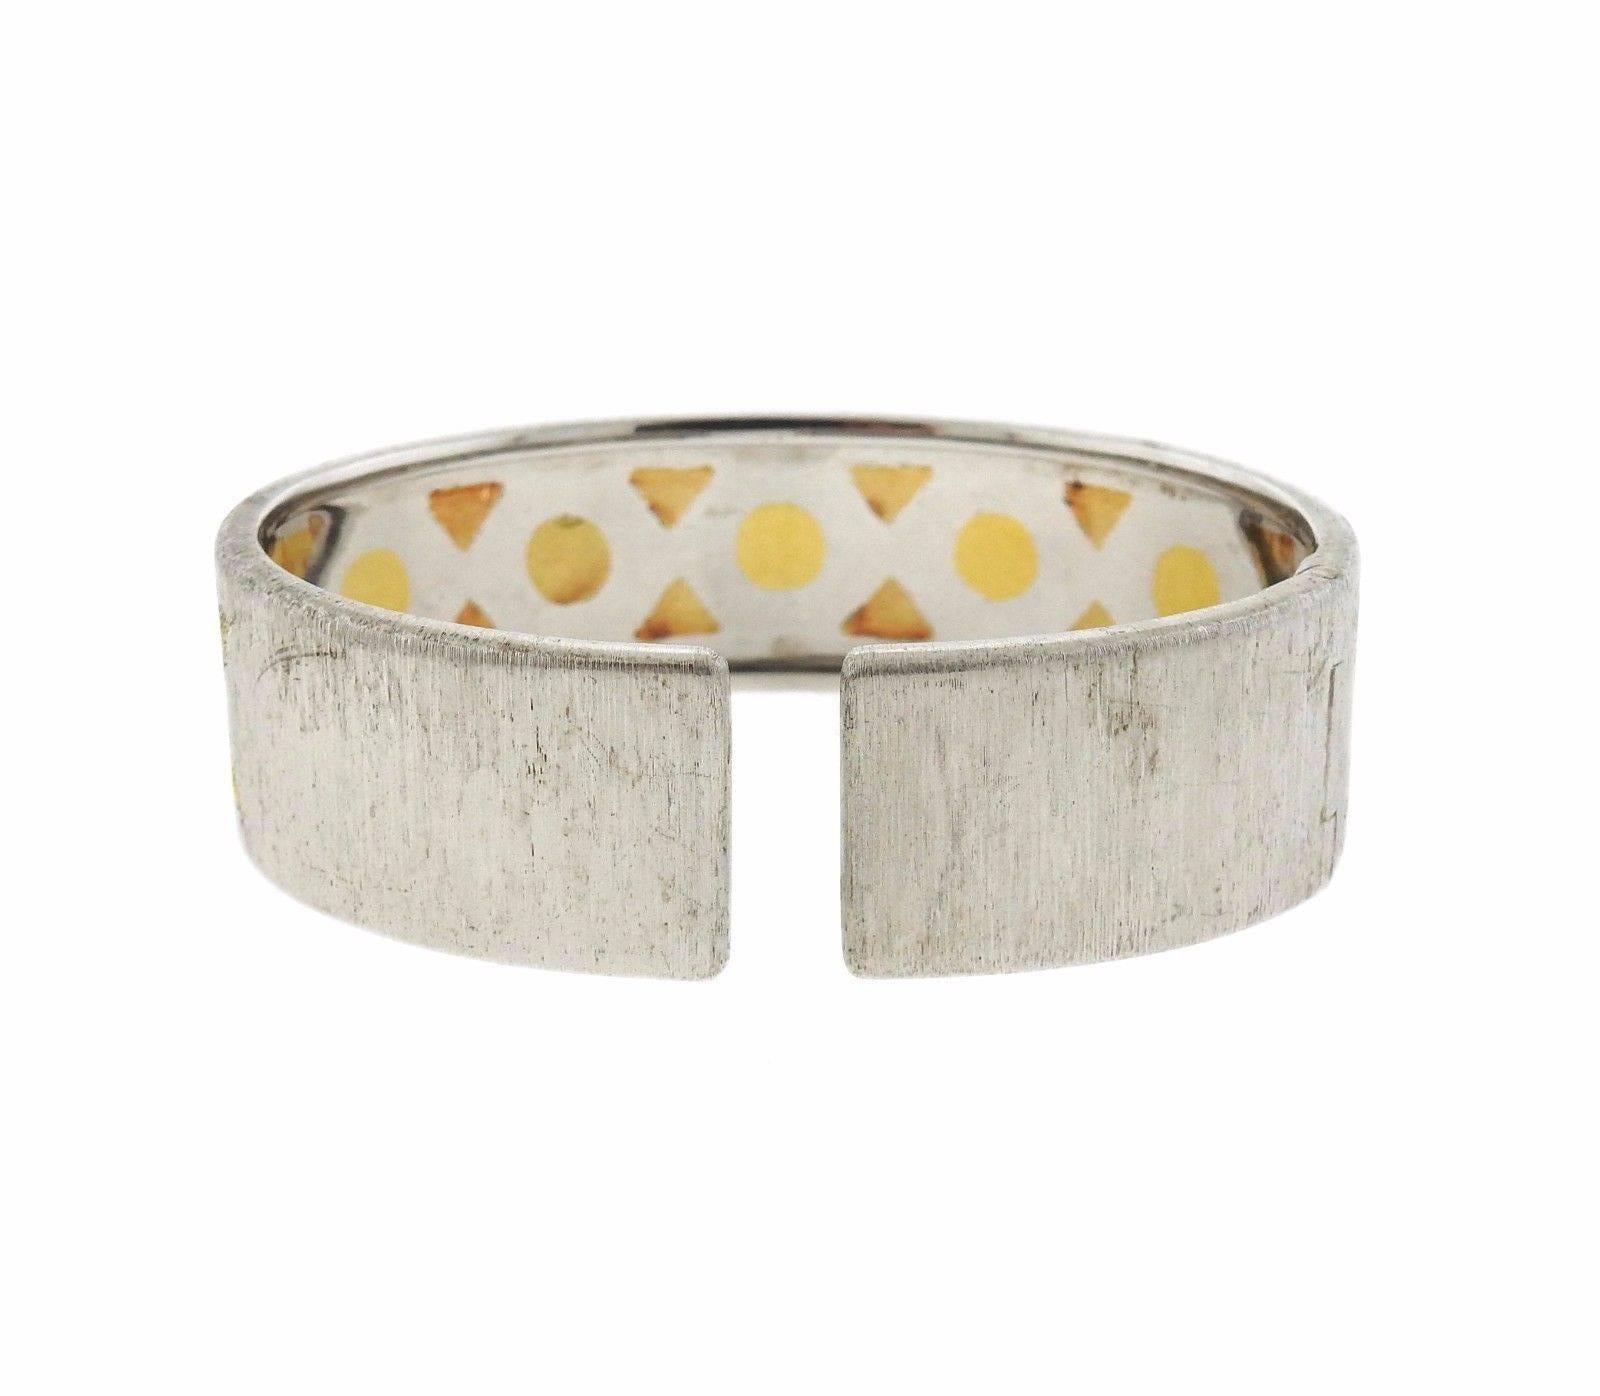 Buccellati 18k gold and sterling silver cuff bracelet, crafted by Buccellati. Bracelet will fit up to 6 1/2